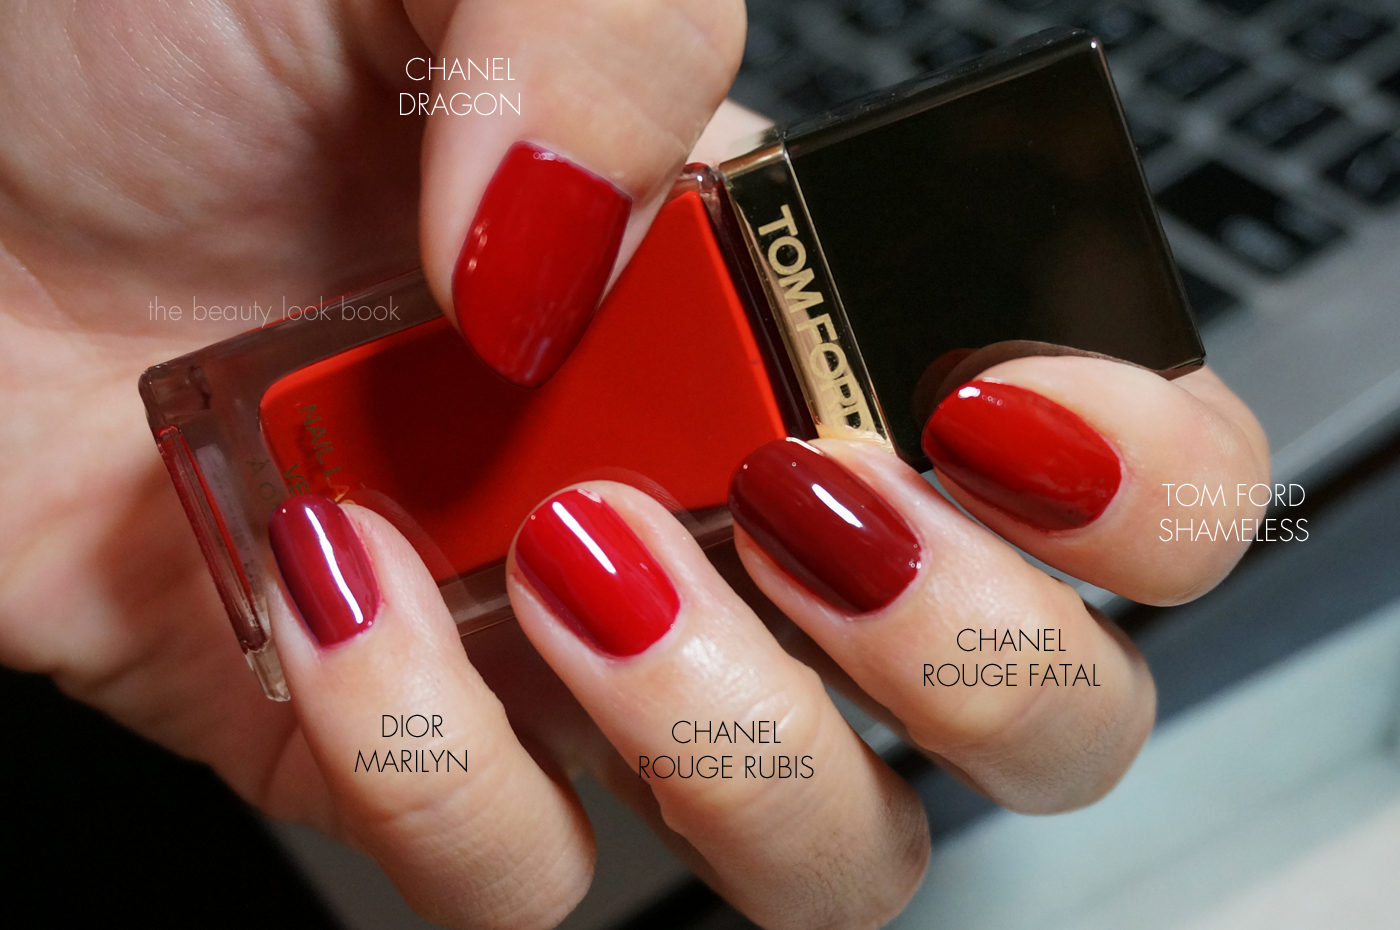 Tom Ford Shameless Nail Lacquer Comparisons - The Beauty Look Book